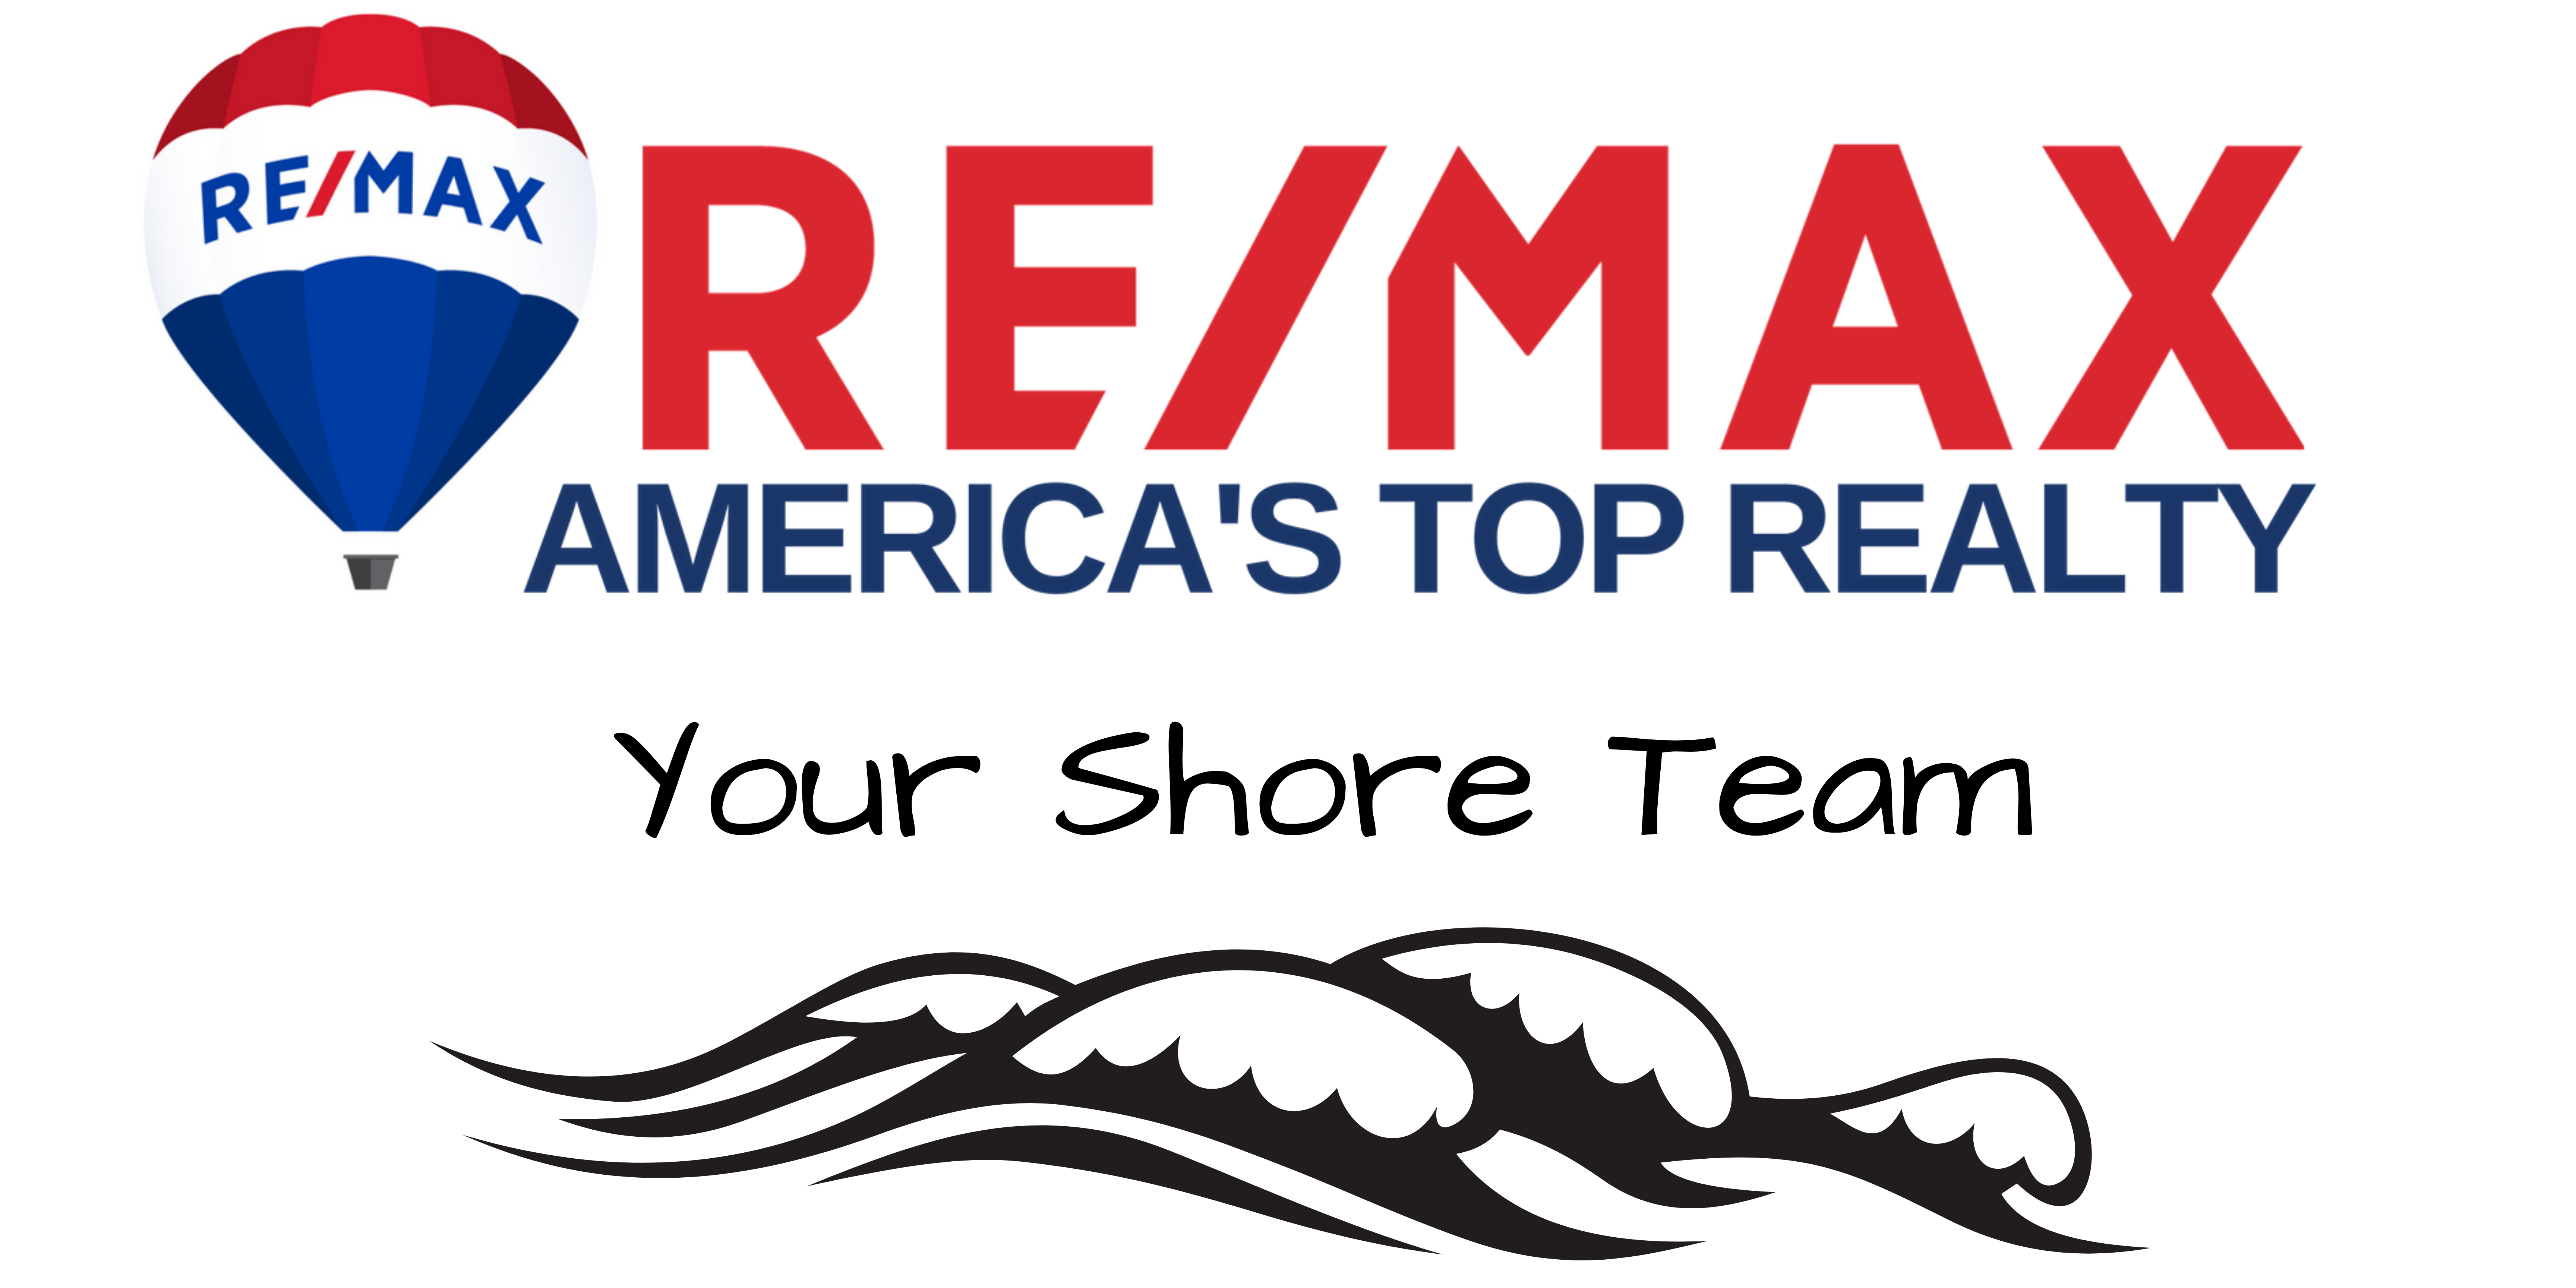 Re/Max America's Top Realty